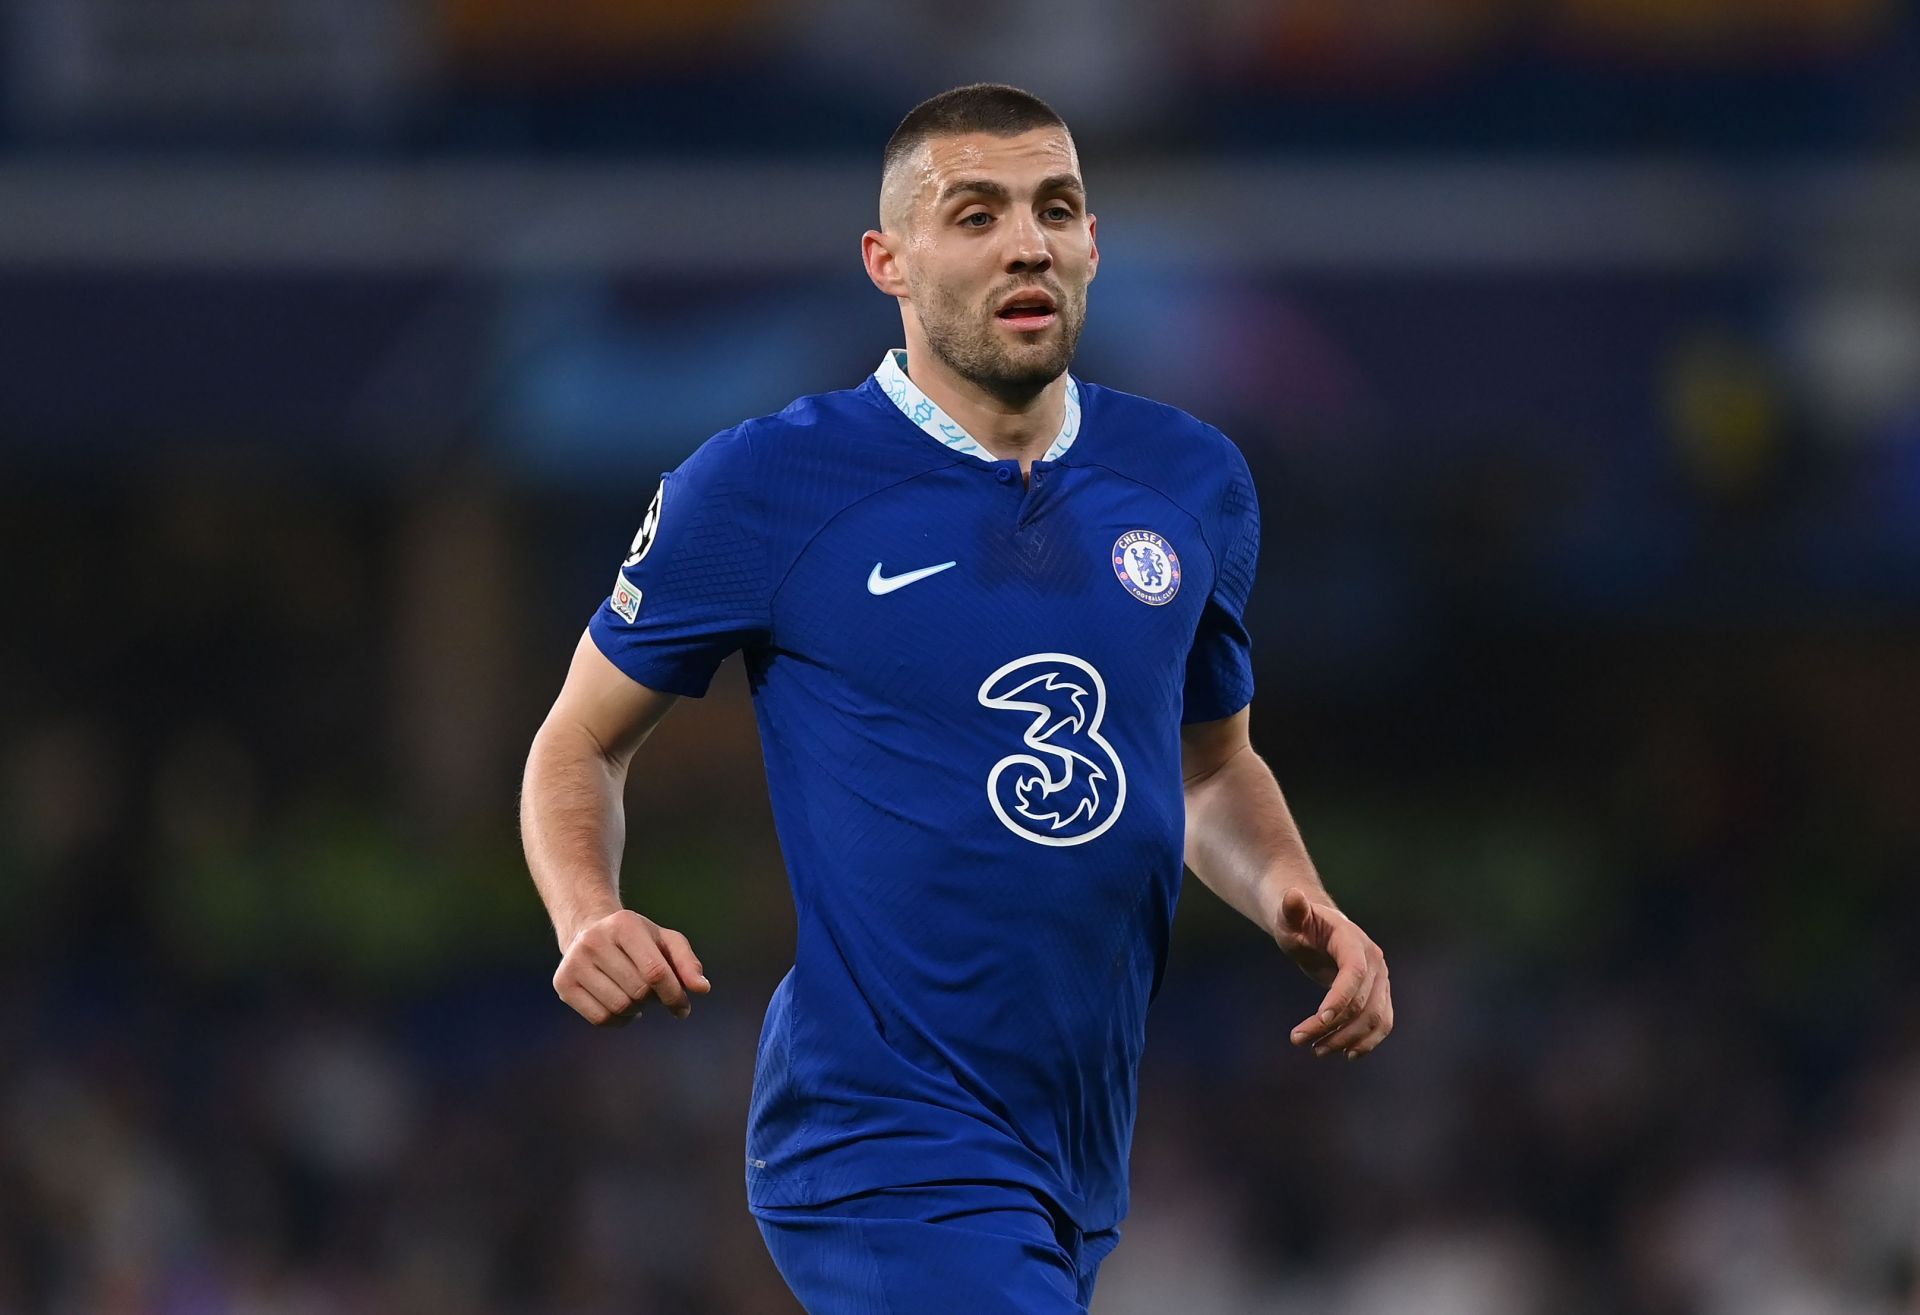 Mateo Kovacic has been solid for Chelsea, but the club may need something else going forward